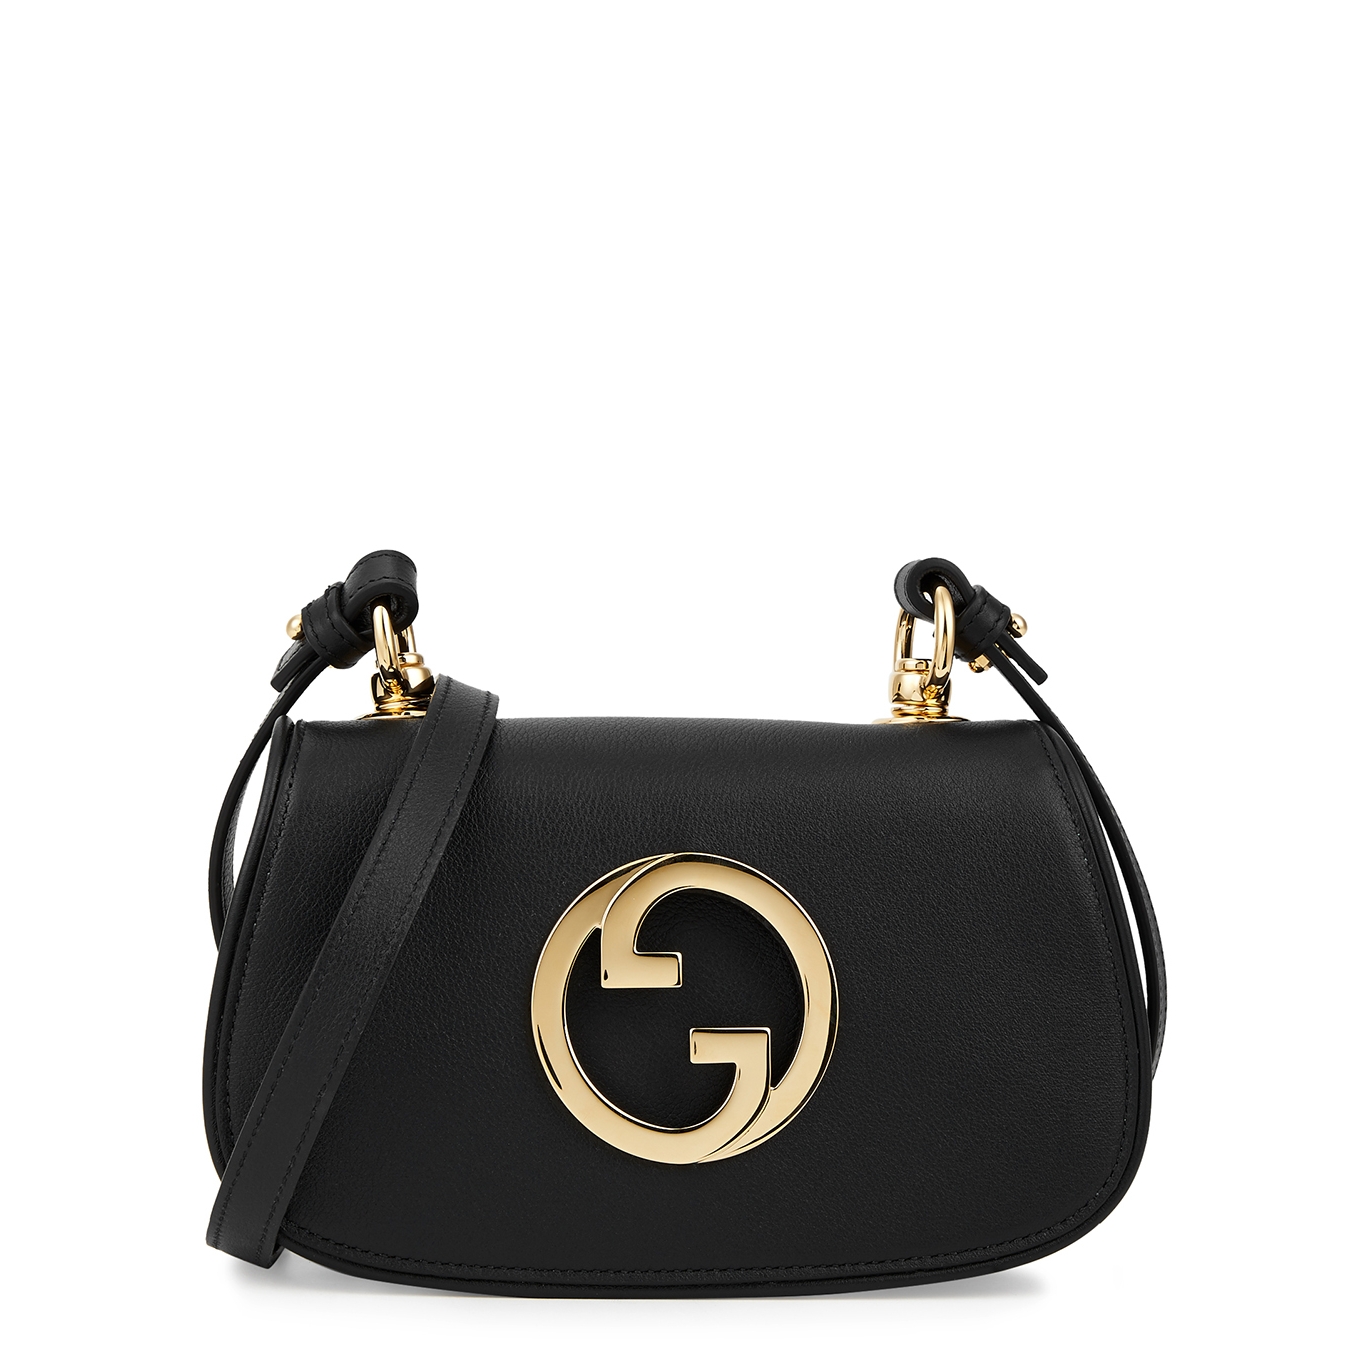 White Blondie leather cross-body bag, Gucci